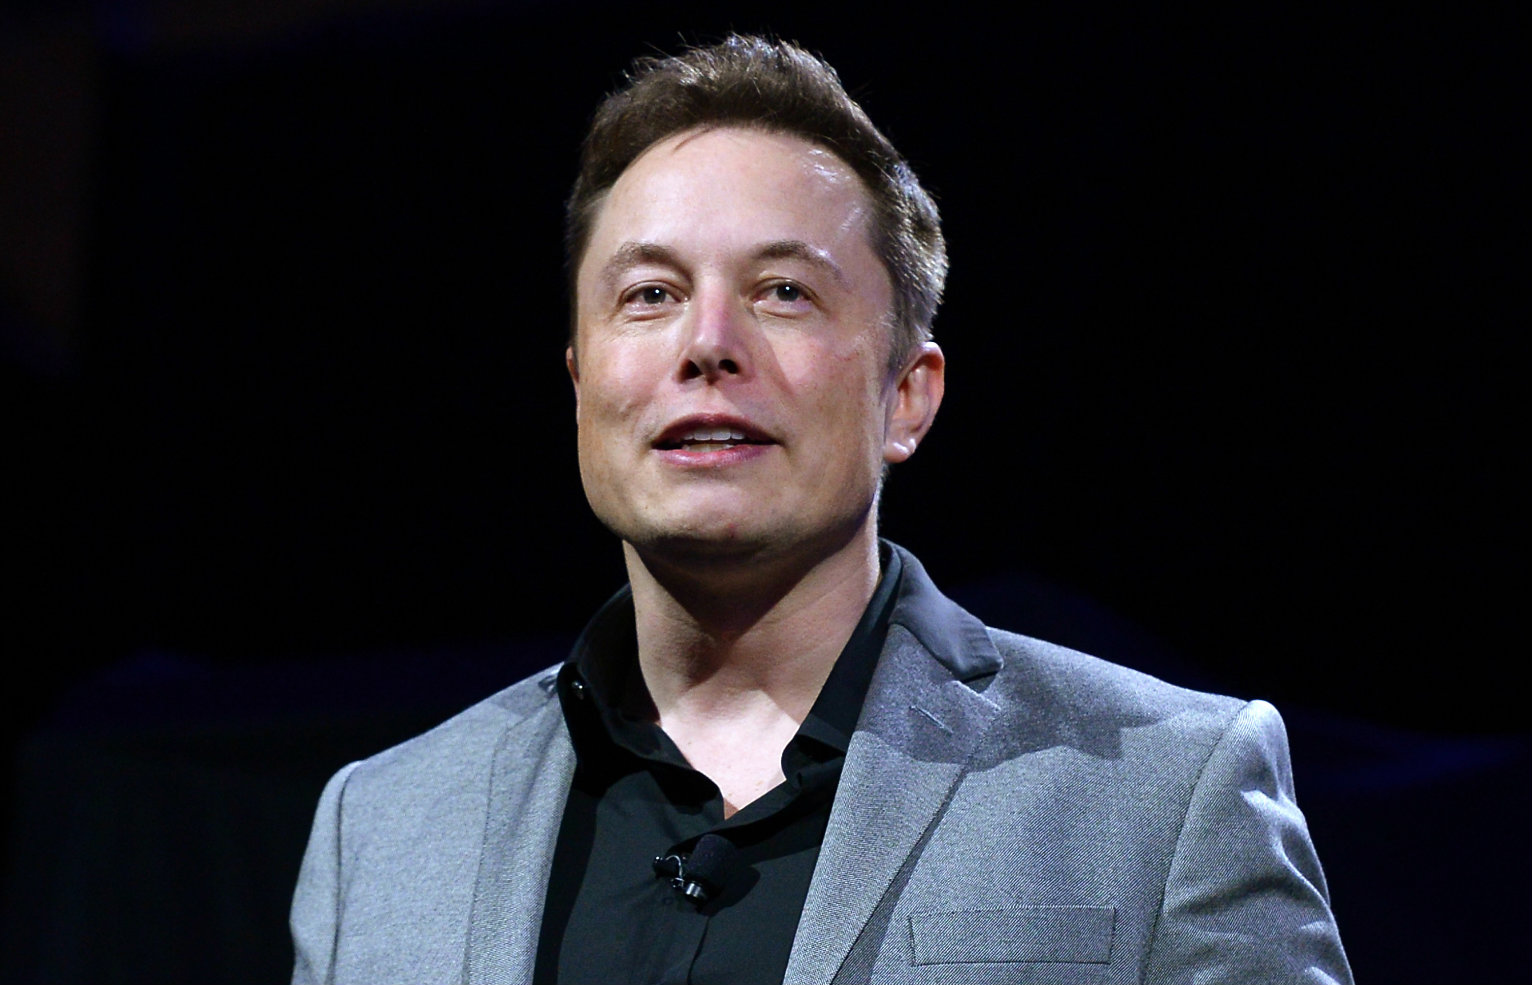 'Off to twitter for a while’: Tech Billionaire Elon Musk decides to take a break